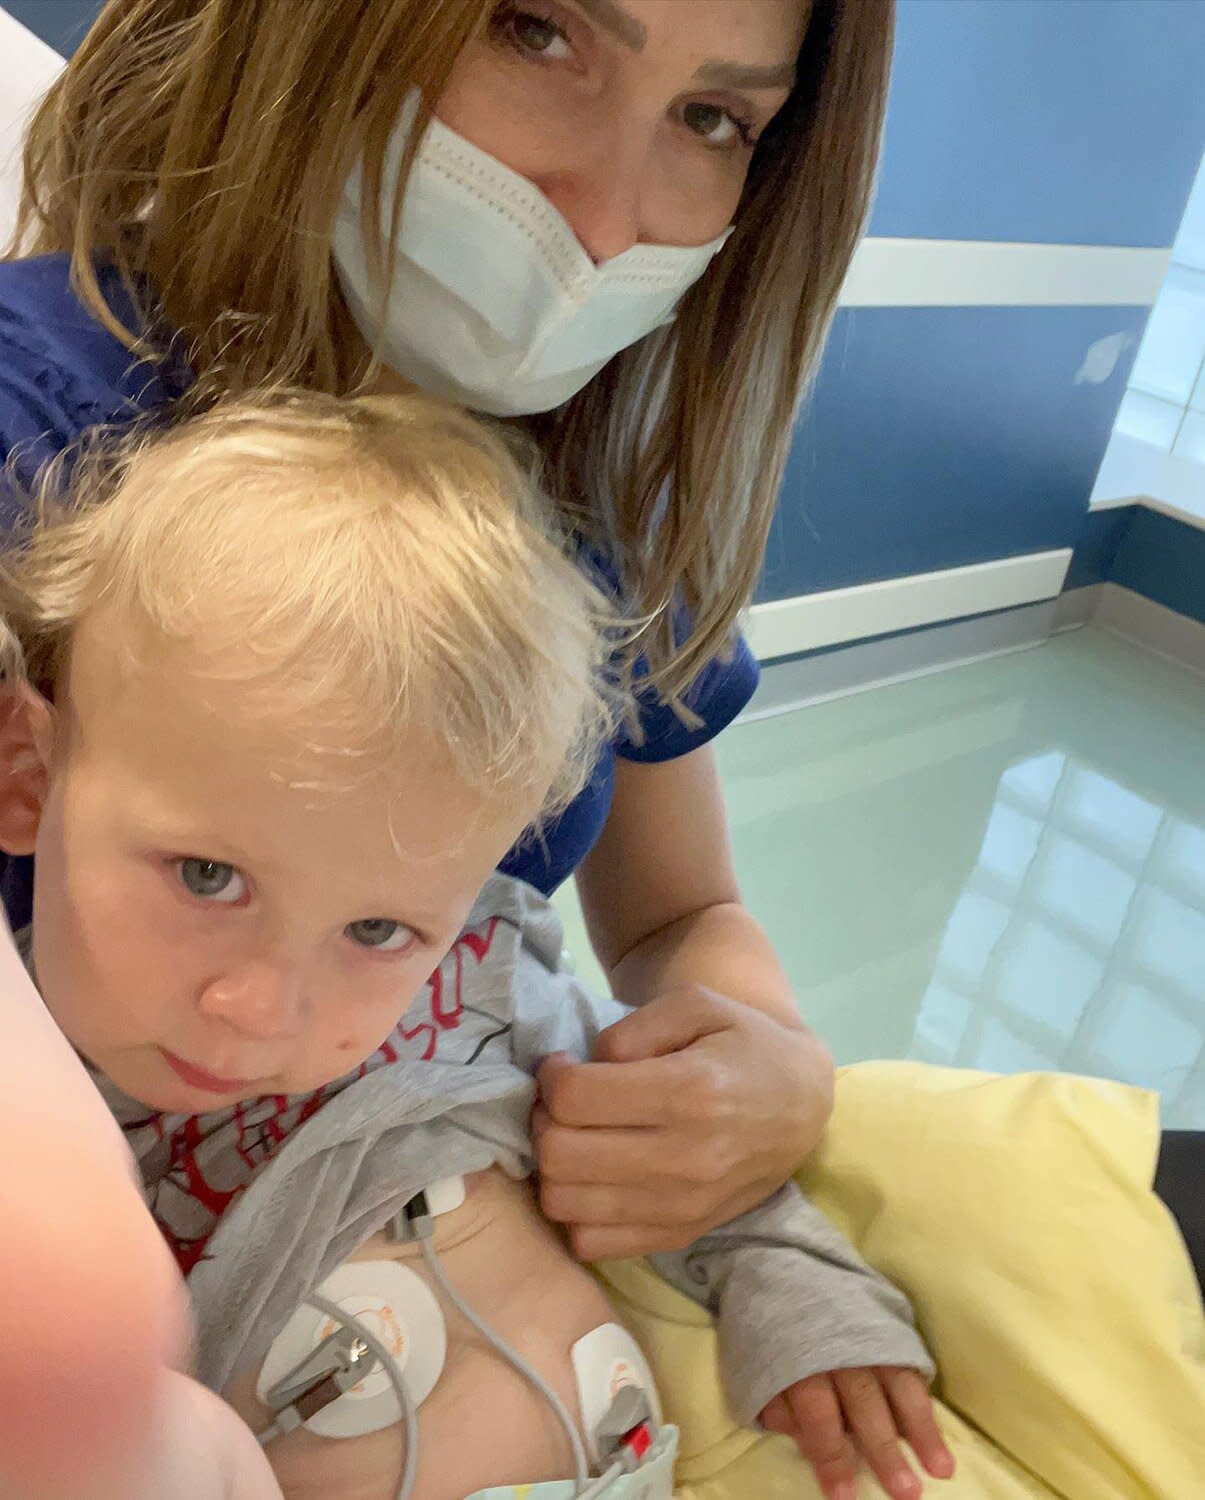 Hilaria Baldwin Shares Her Son Edu Was in 'Such Distress' and Rushed to Hospital From an Allergic Reaction